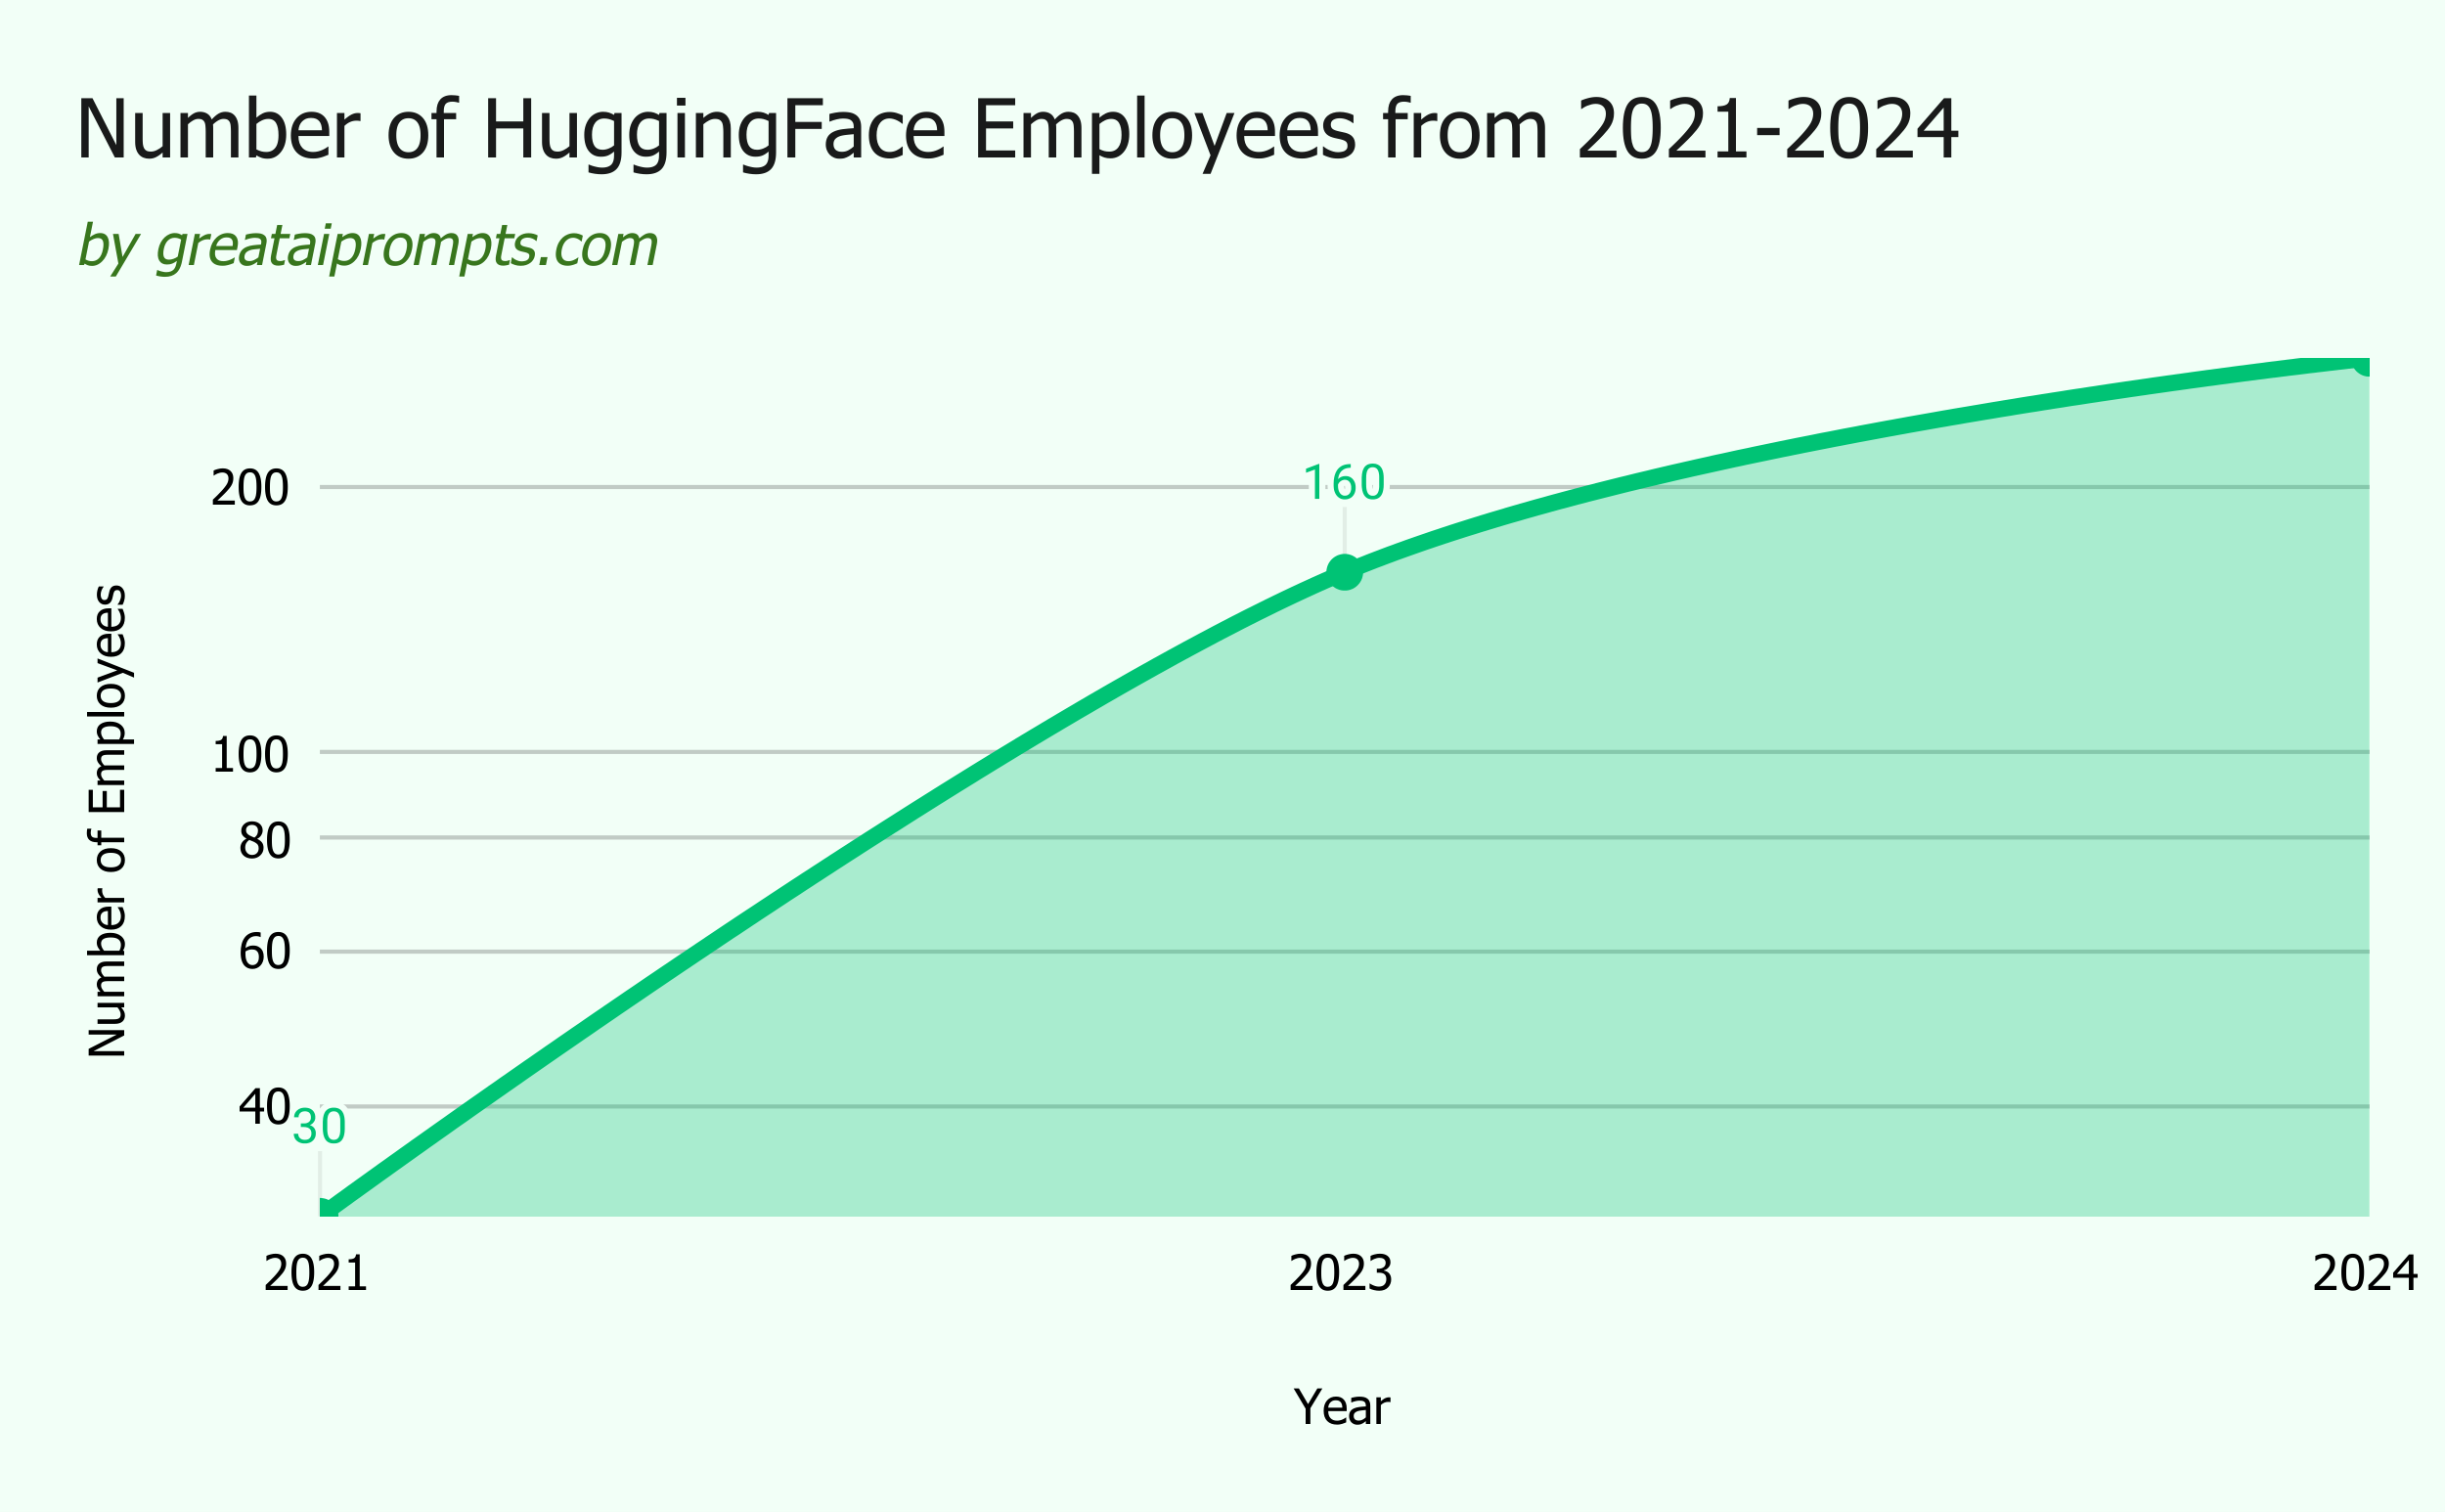 How many Employees does Hugging Face have?
